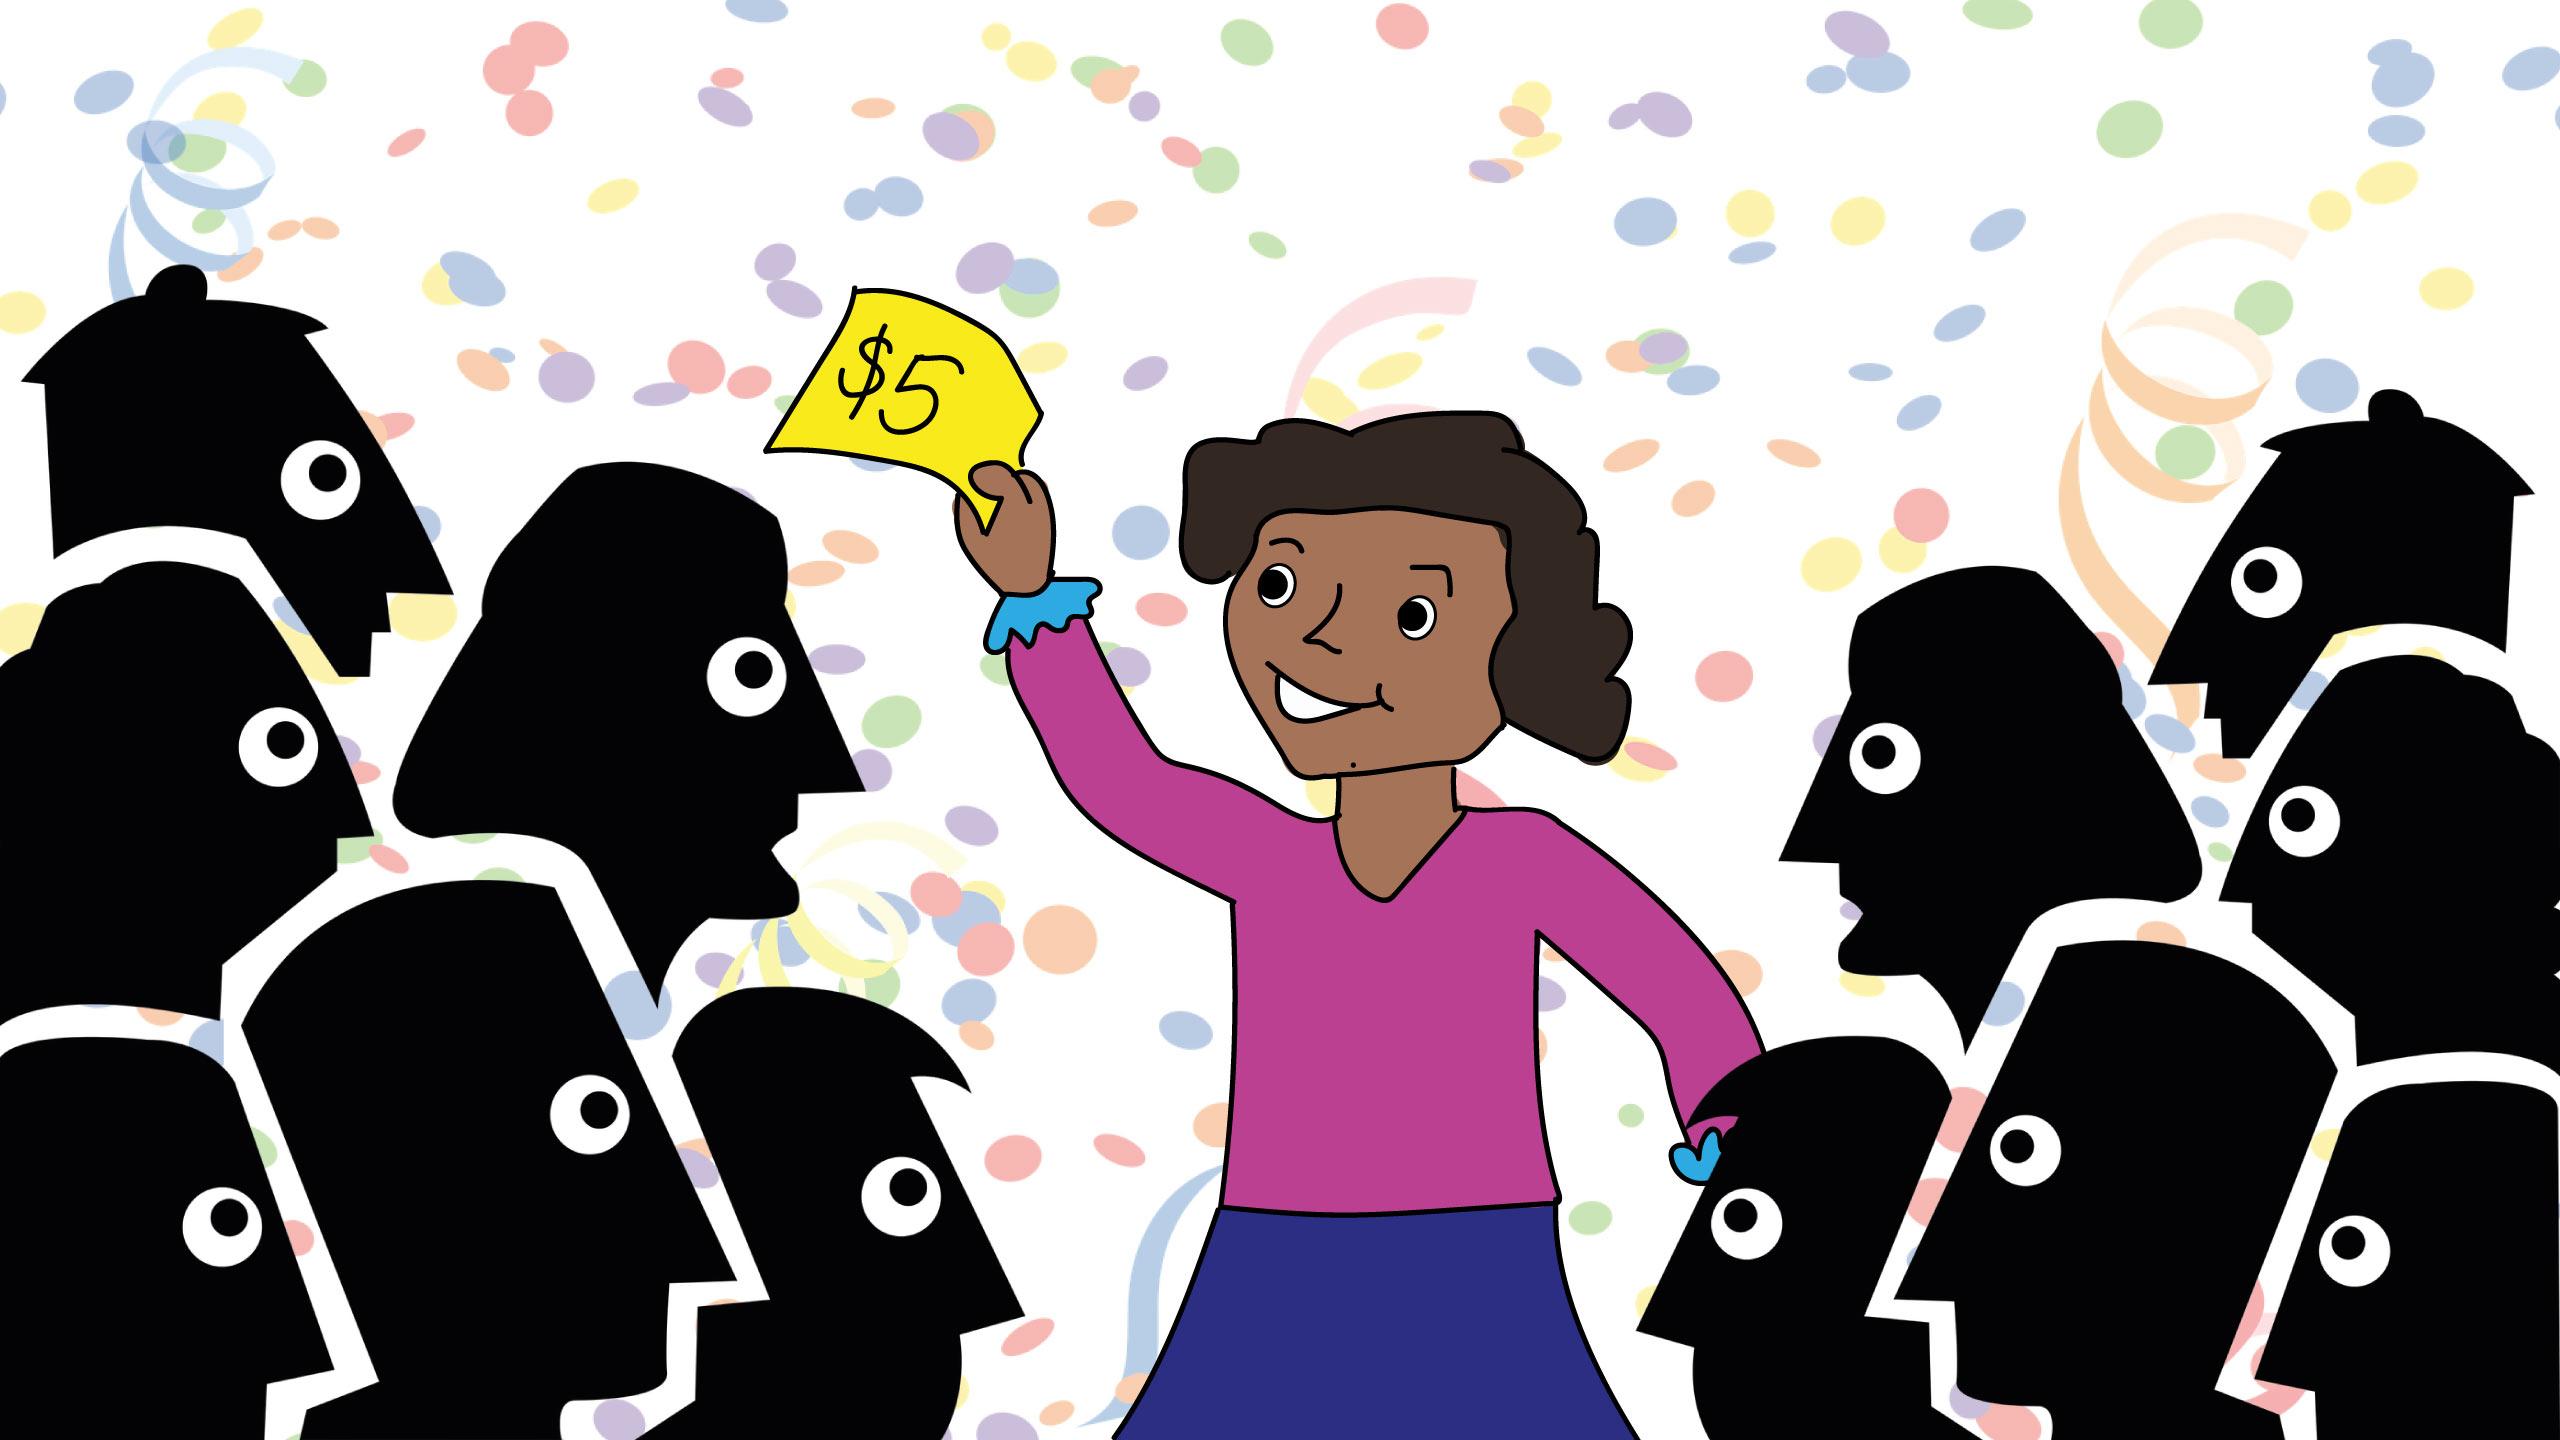 A girl stands in the middle of a crowd happily holding a $5 bill